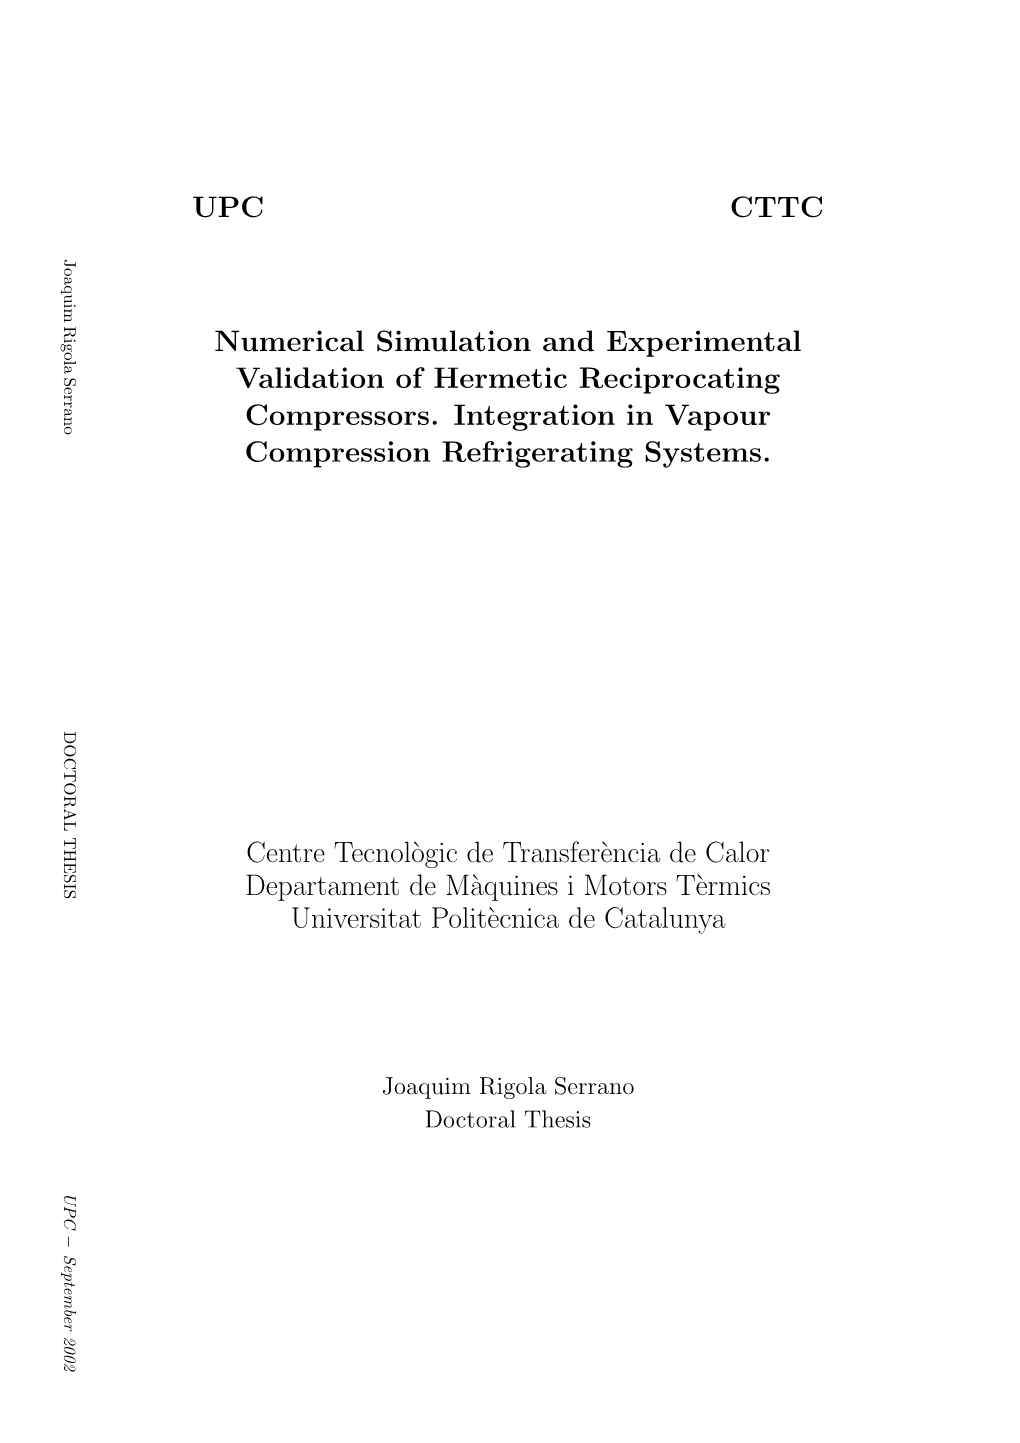 UPC CTTC Numerical Simulation and Experimental Validation of Hermetic